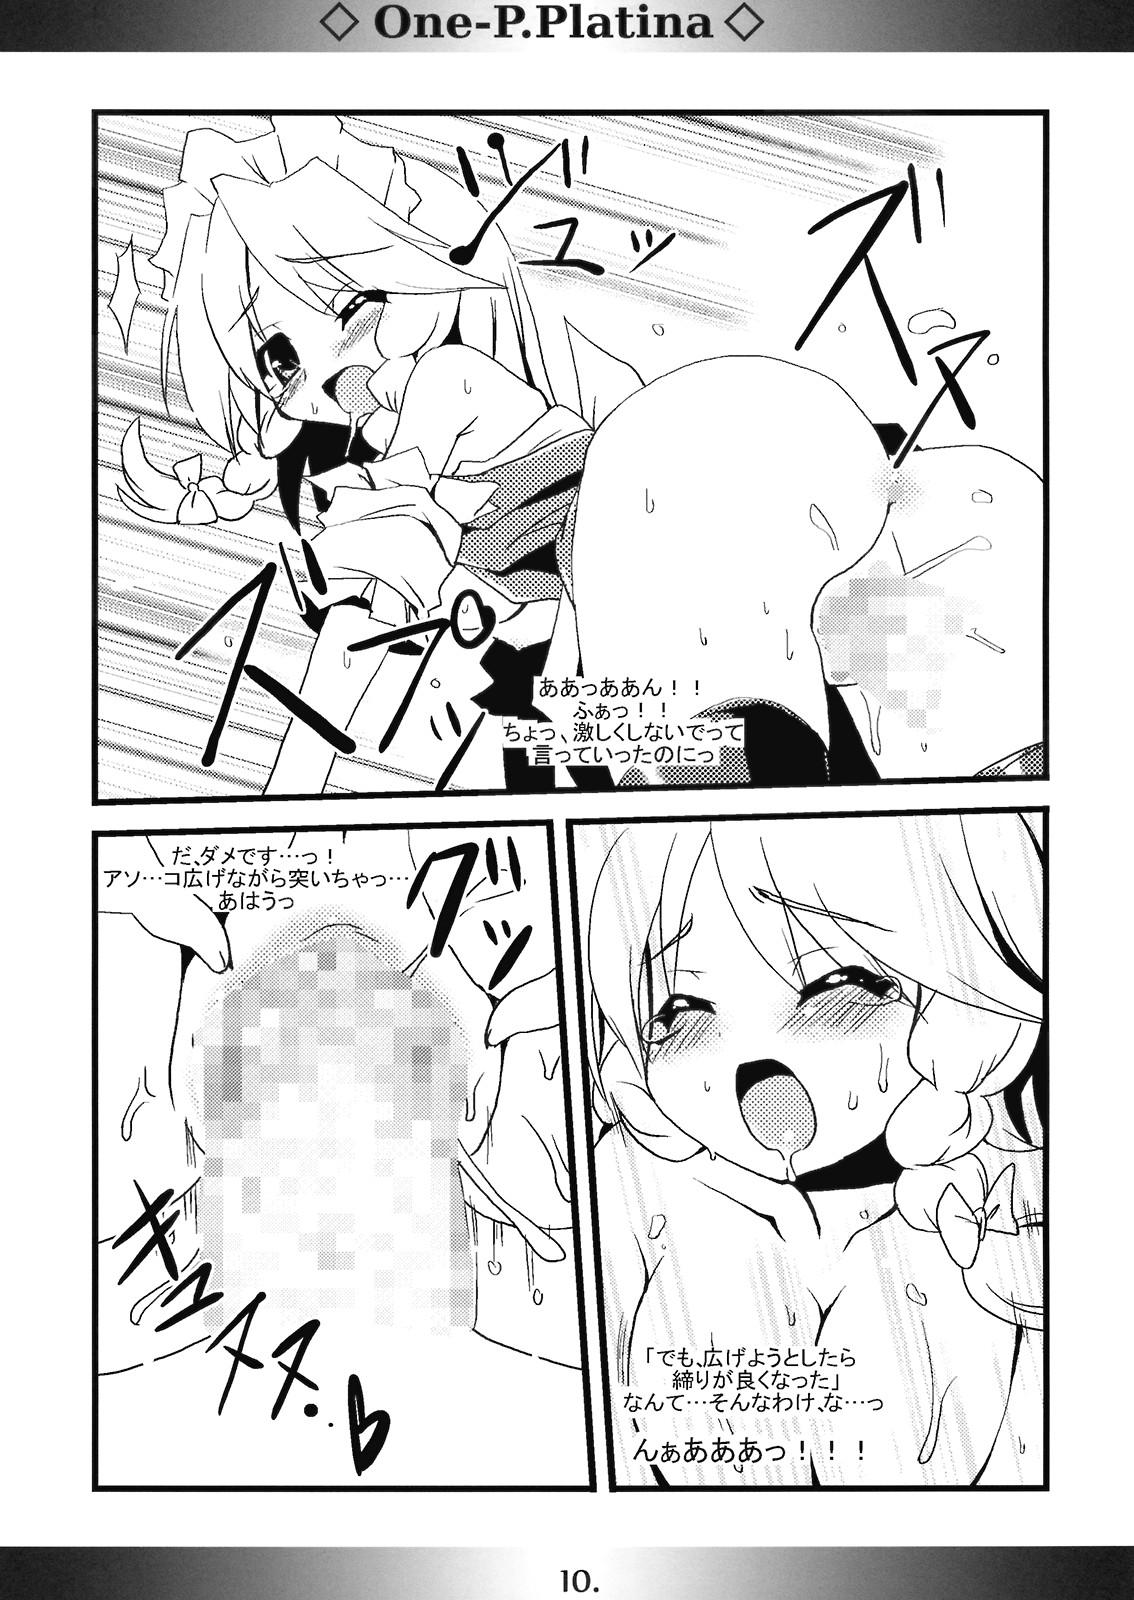 Pussy Licking One-P.Platina - Touhou project Retro - Page 10